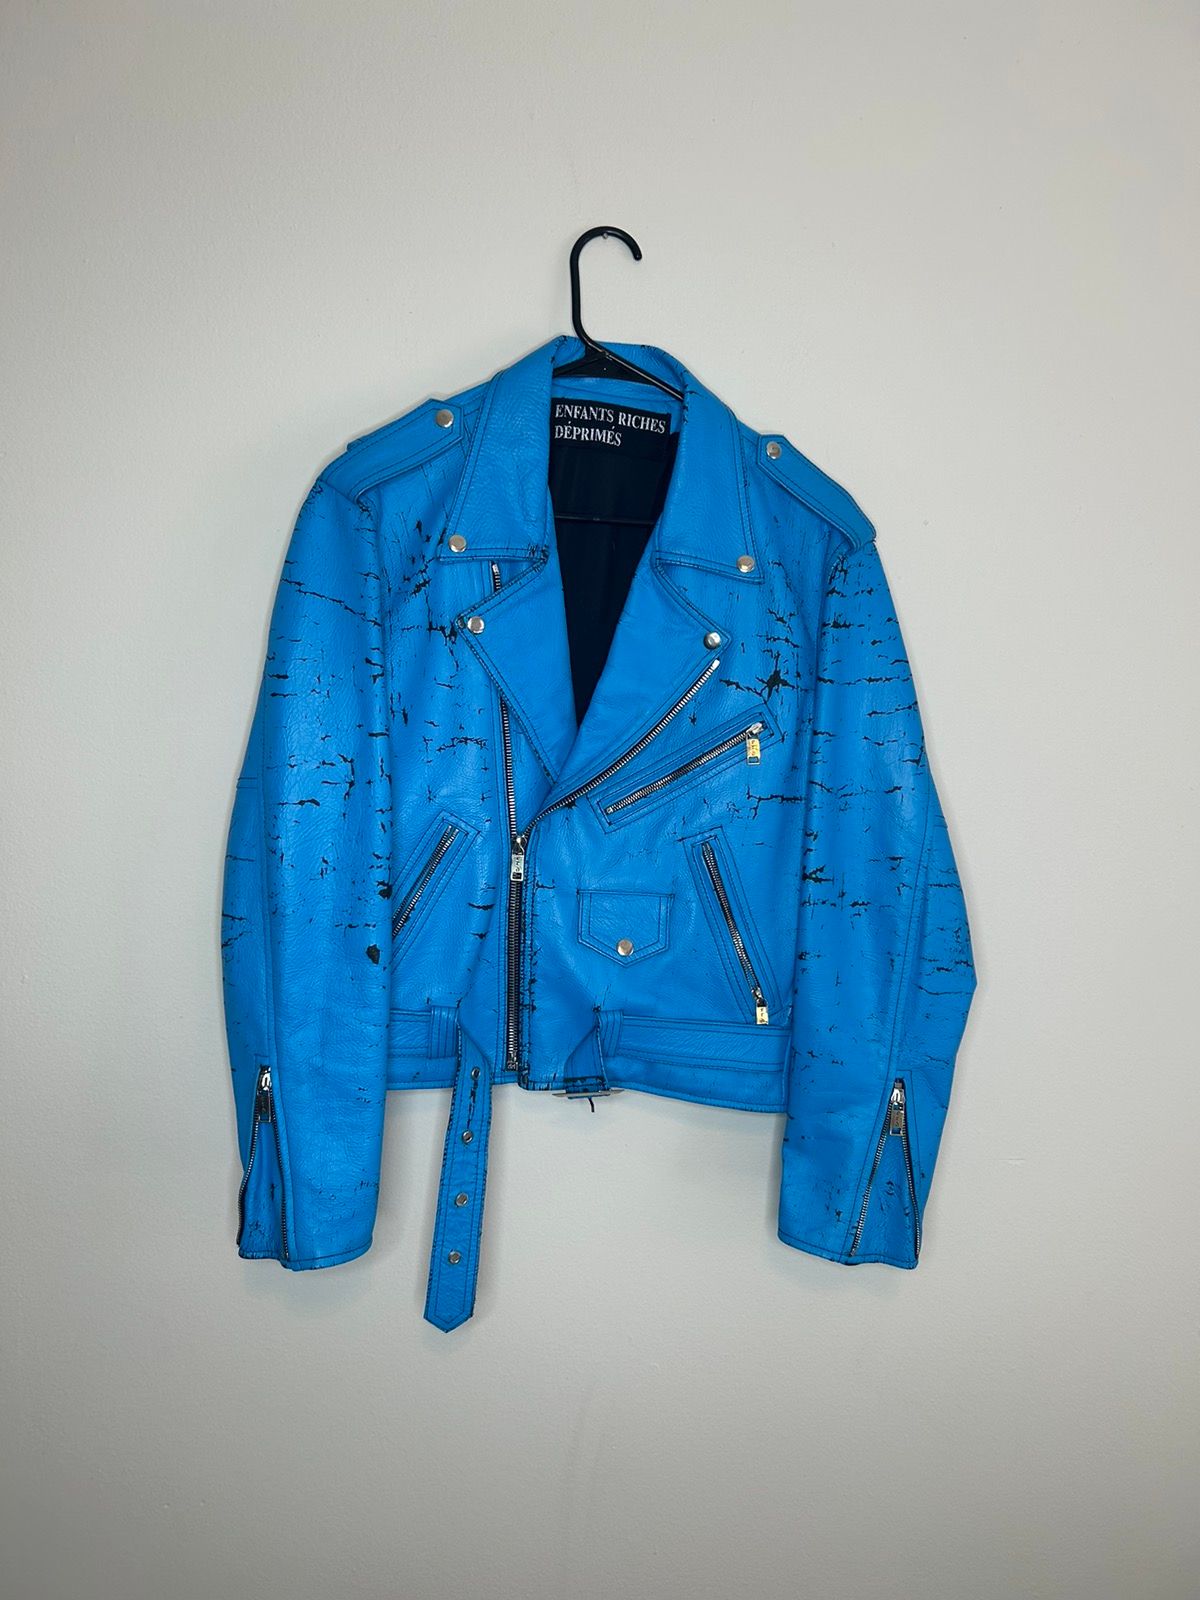 Pre-owned Enfants Riches Deprimes Grail Erd Cracked Painted Leather Jacket In Blue